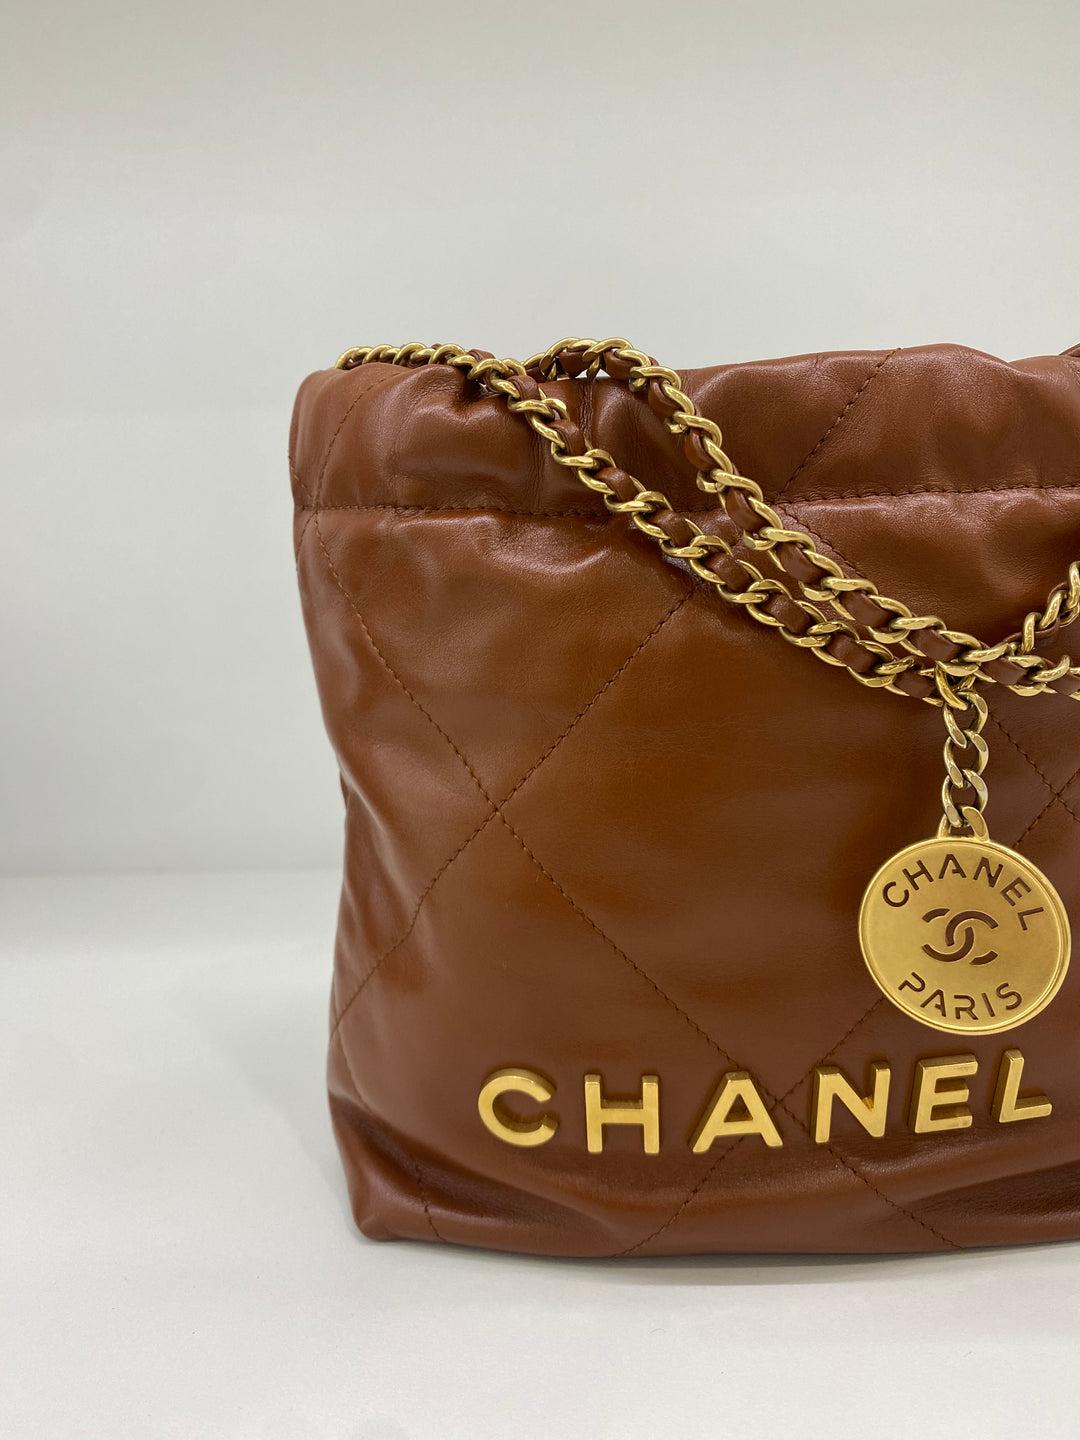 This elegant Chanel 22 Bag Mini is a timeless and classic piece, crafted from the finest quilted leather. Its timeless silhouette will take you from day to night, adding a touch of sophistication to any ensemble. With its signature gold hardware,